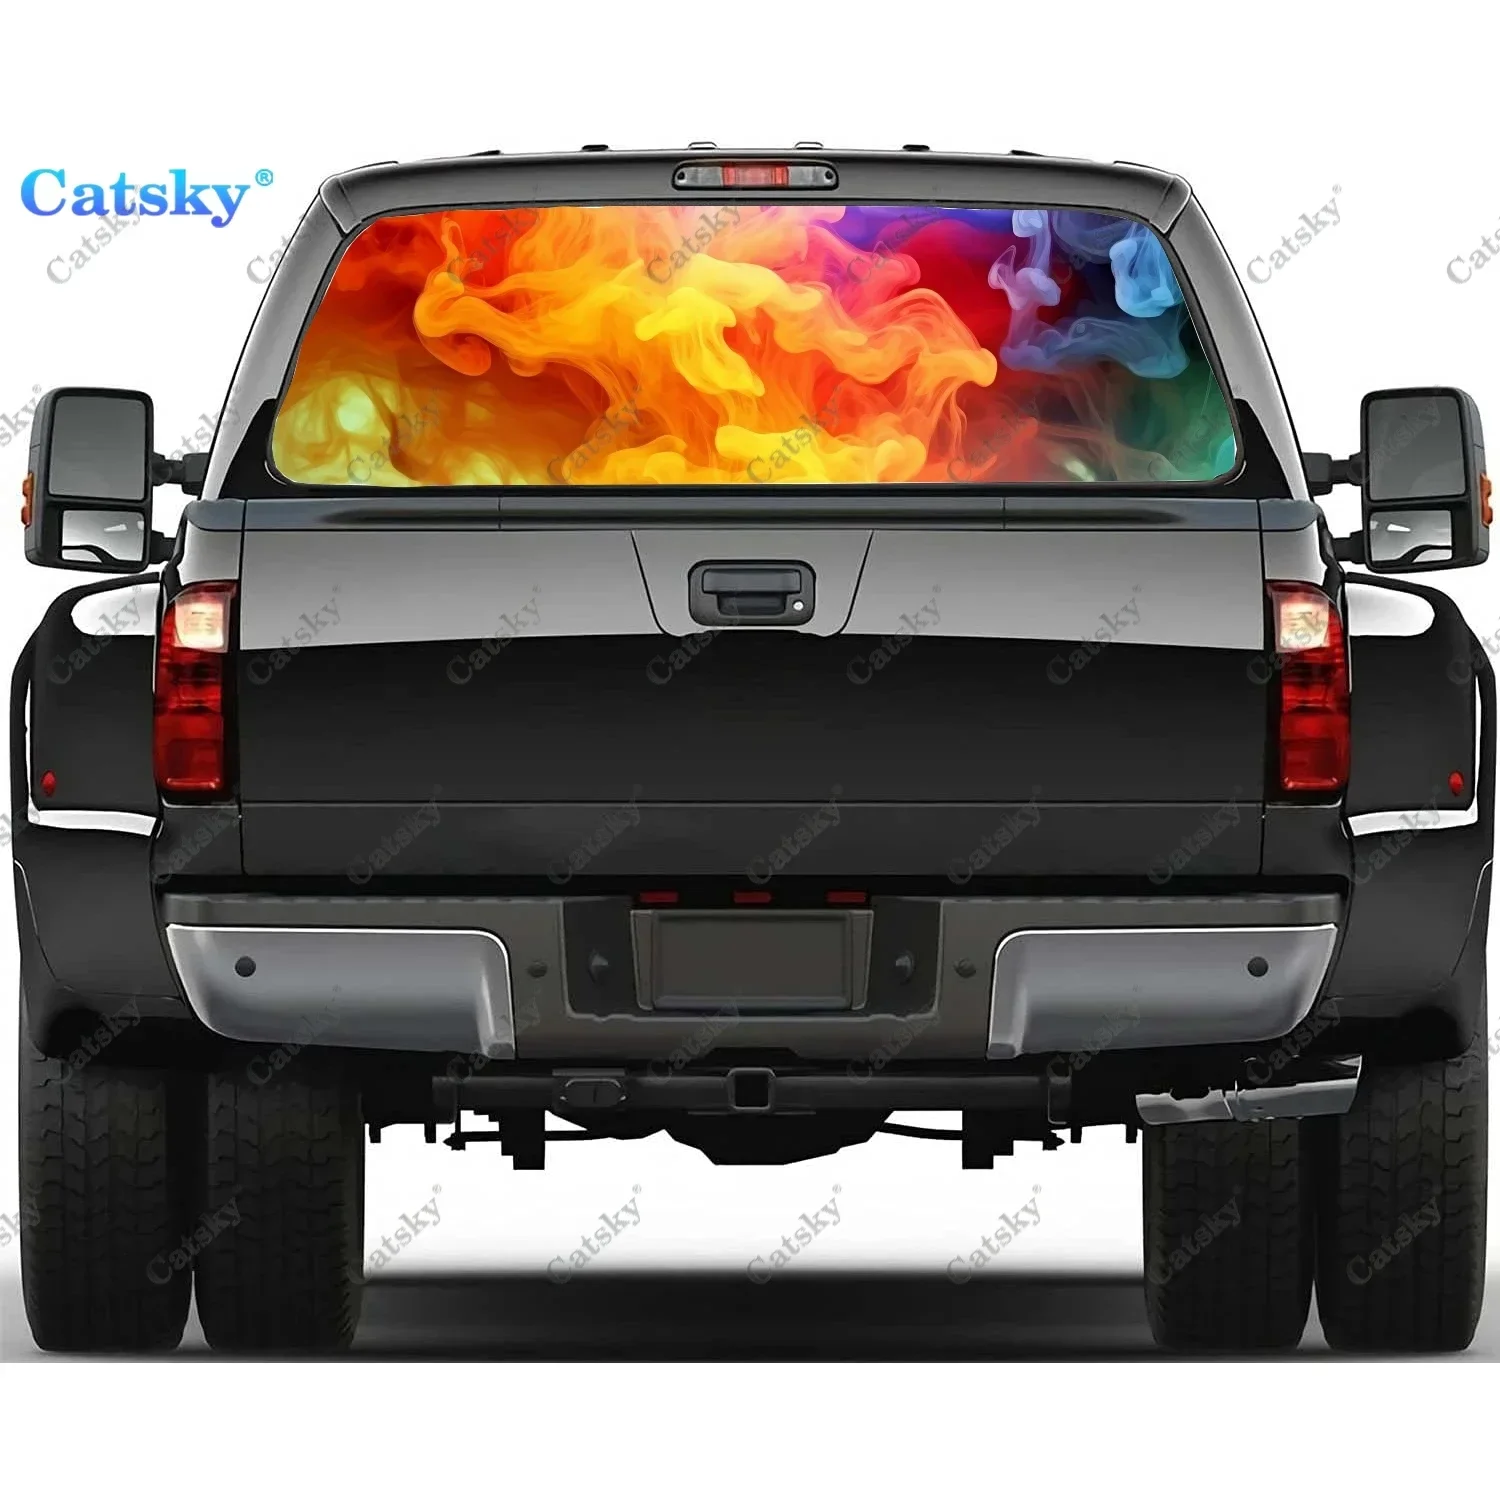 

Colorful Cloud of Smoke Rear Window Decal Fit Pickup,Truck,Car Universal See Through Perforated Back Window Vinyl Sticker